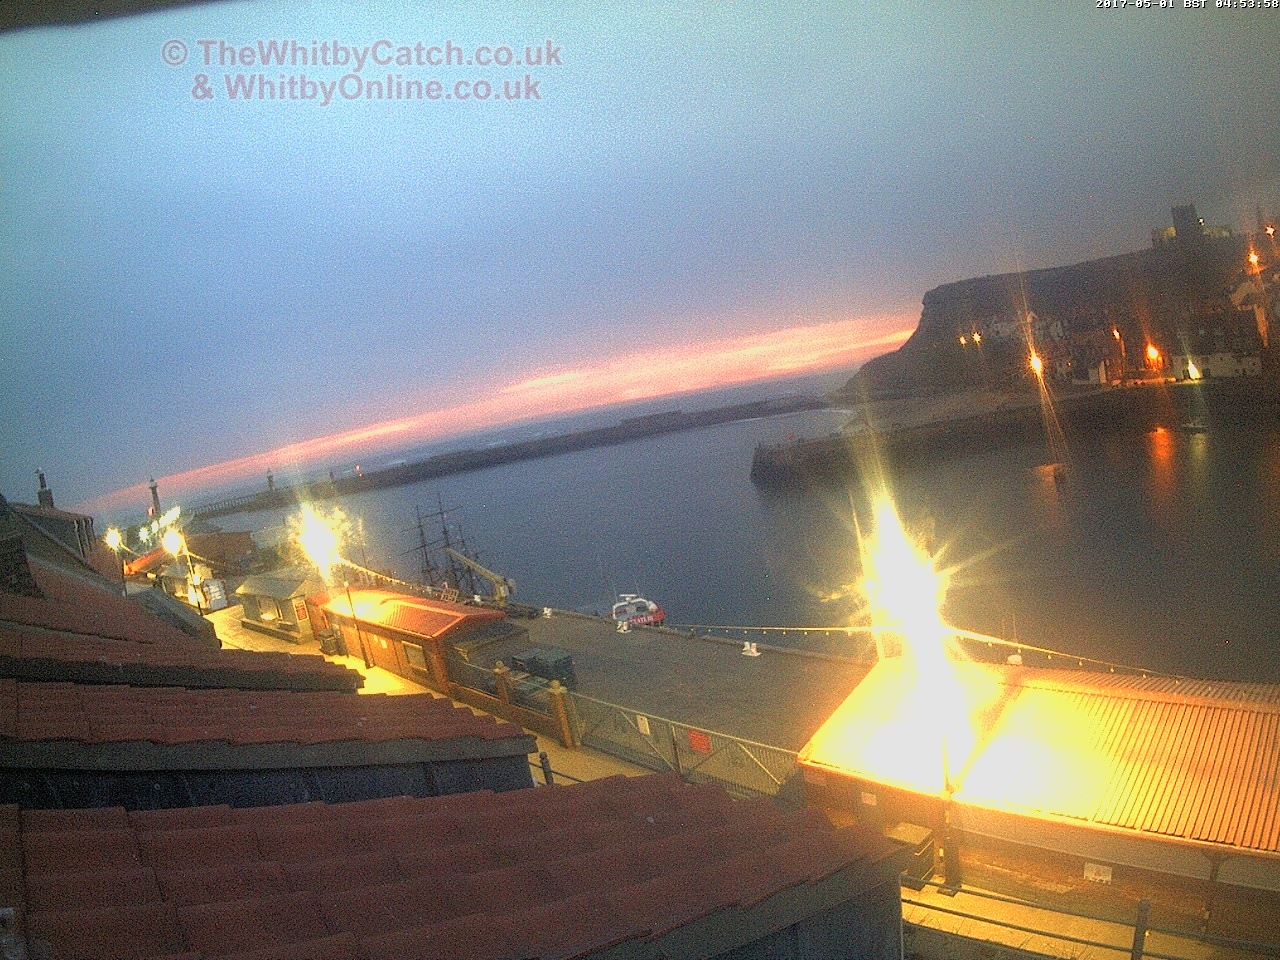 Whitby Mon 1st May 2017 04:54.